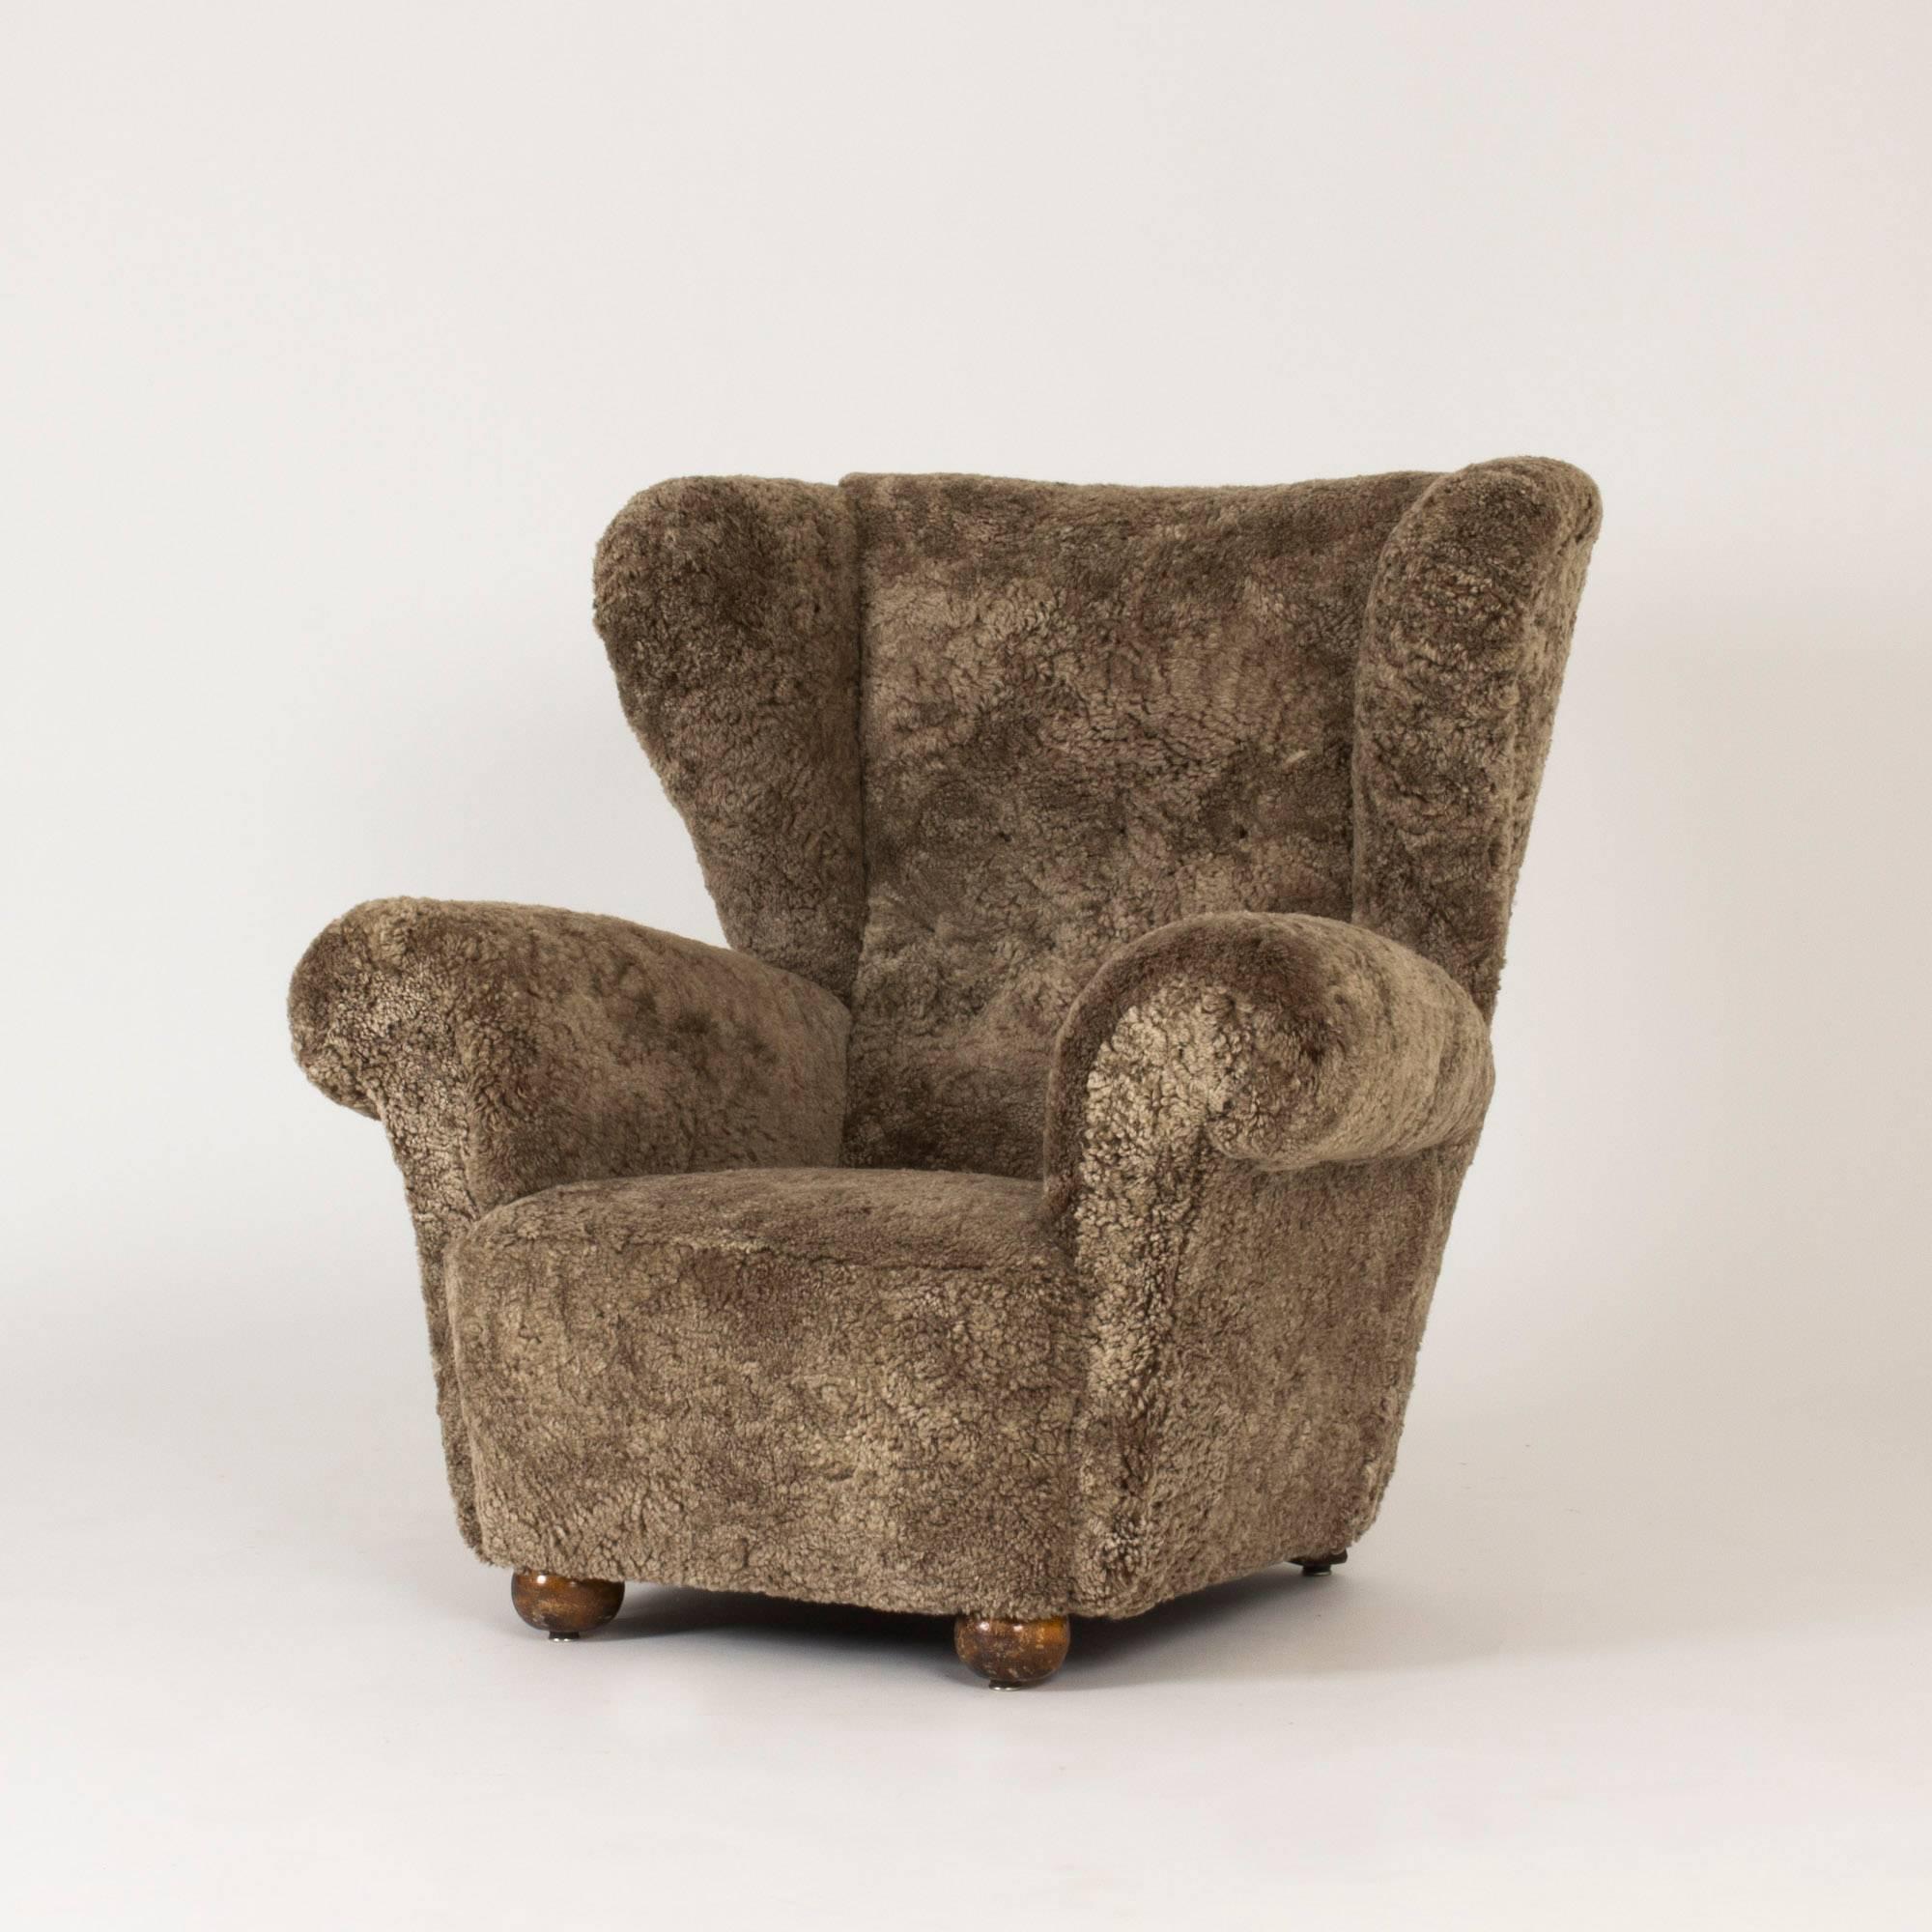 Oversized, incredibly cozy Swedish 1930s lounge chair, reupholstered with sheepskin. Made by an unknown master carpenter. The chair has exaggerated lines and bold angles, giving it a very cool expression. Round wooden feet.